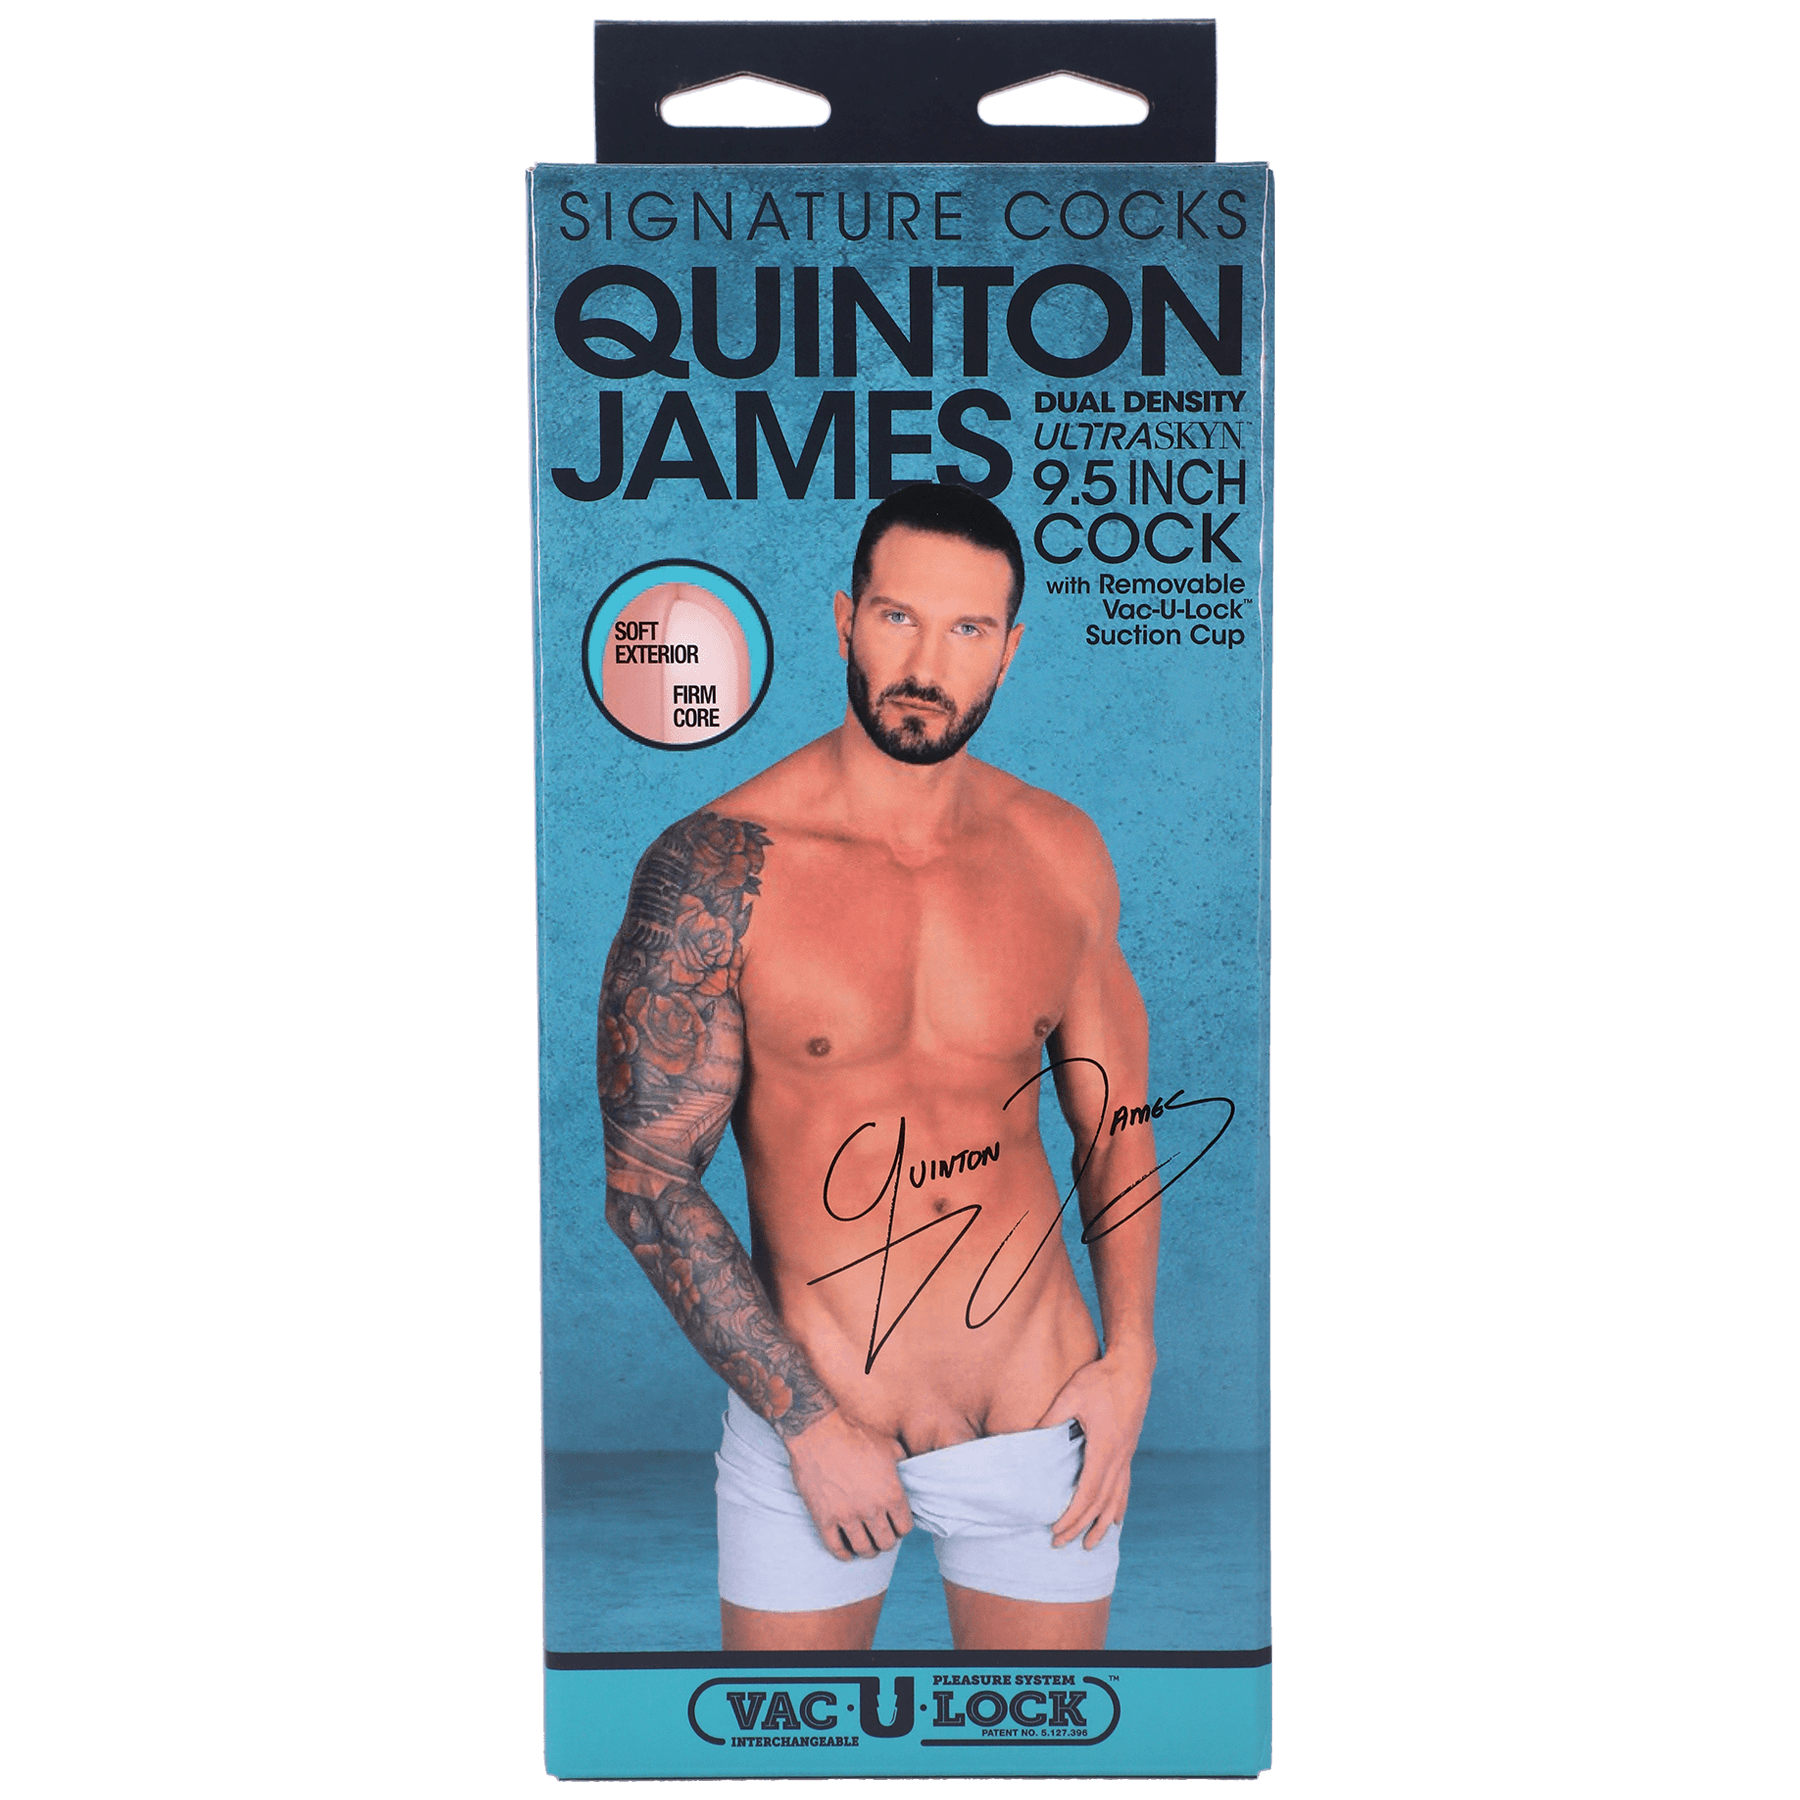 Signature Cocks Ultraskyn Quinton James Dildo 9" - Buy At Luxury Toy X - Free 3-Day Shipping